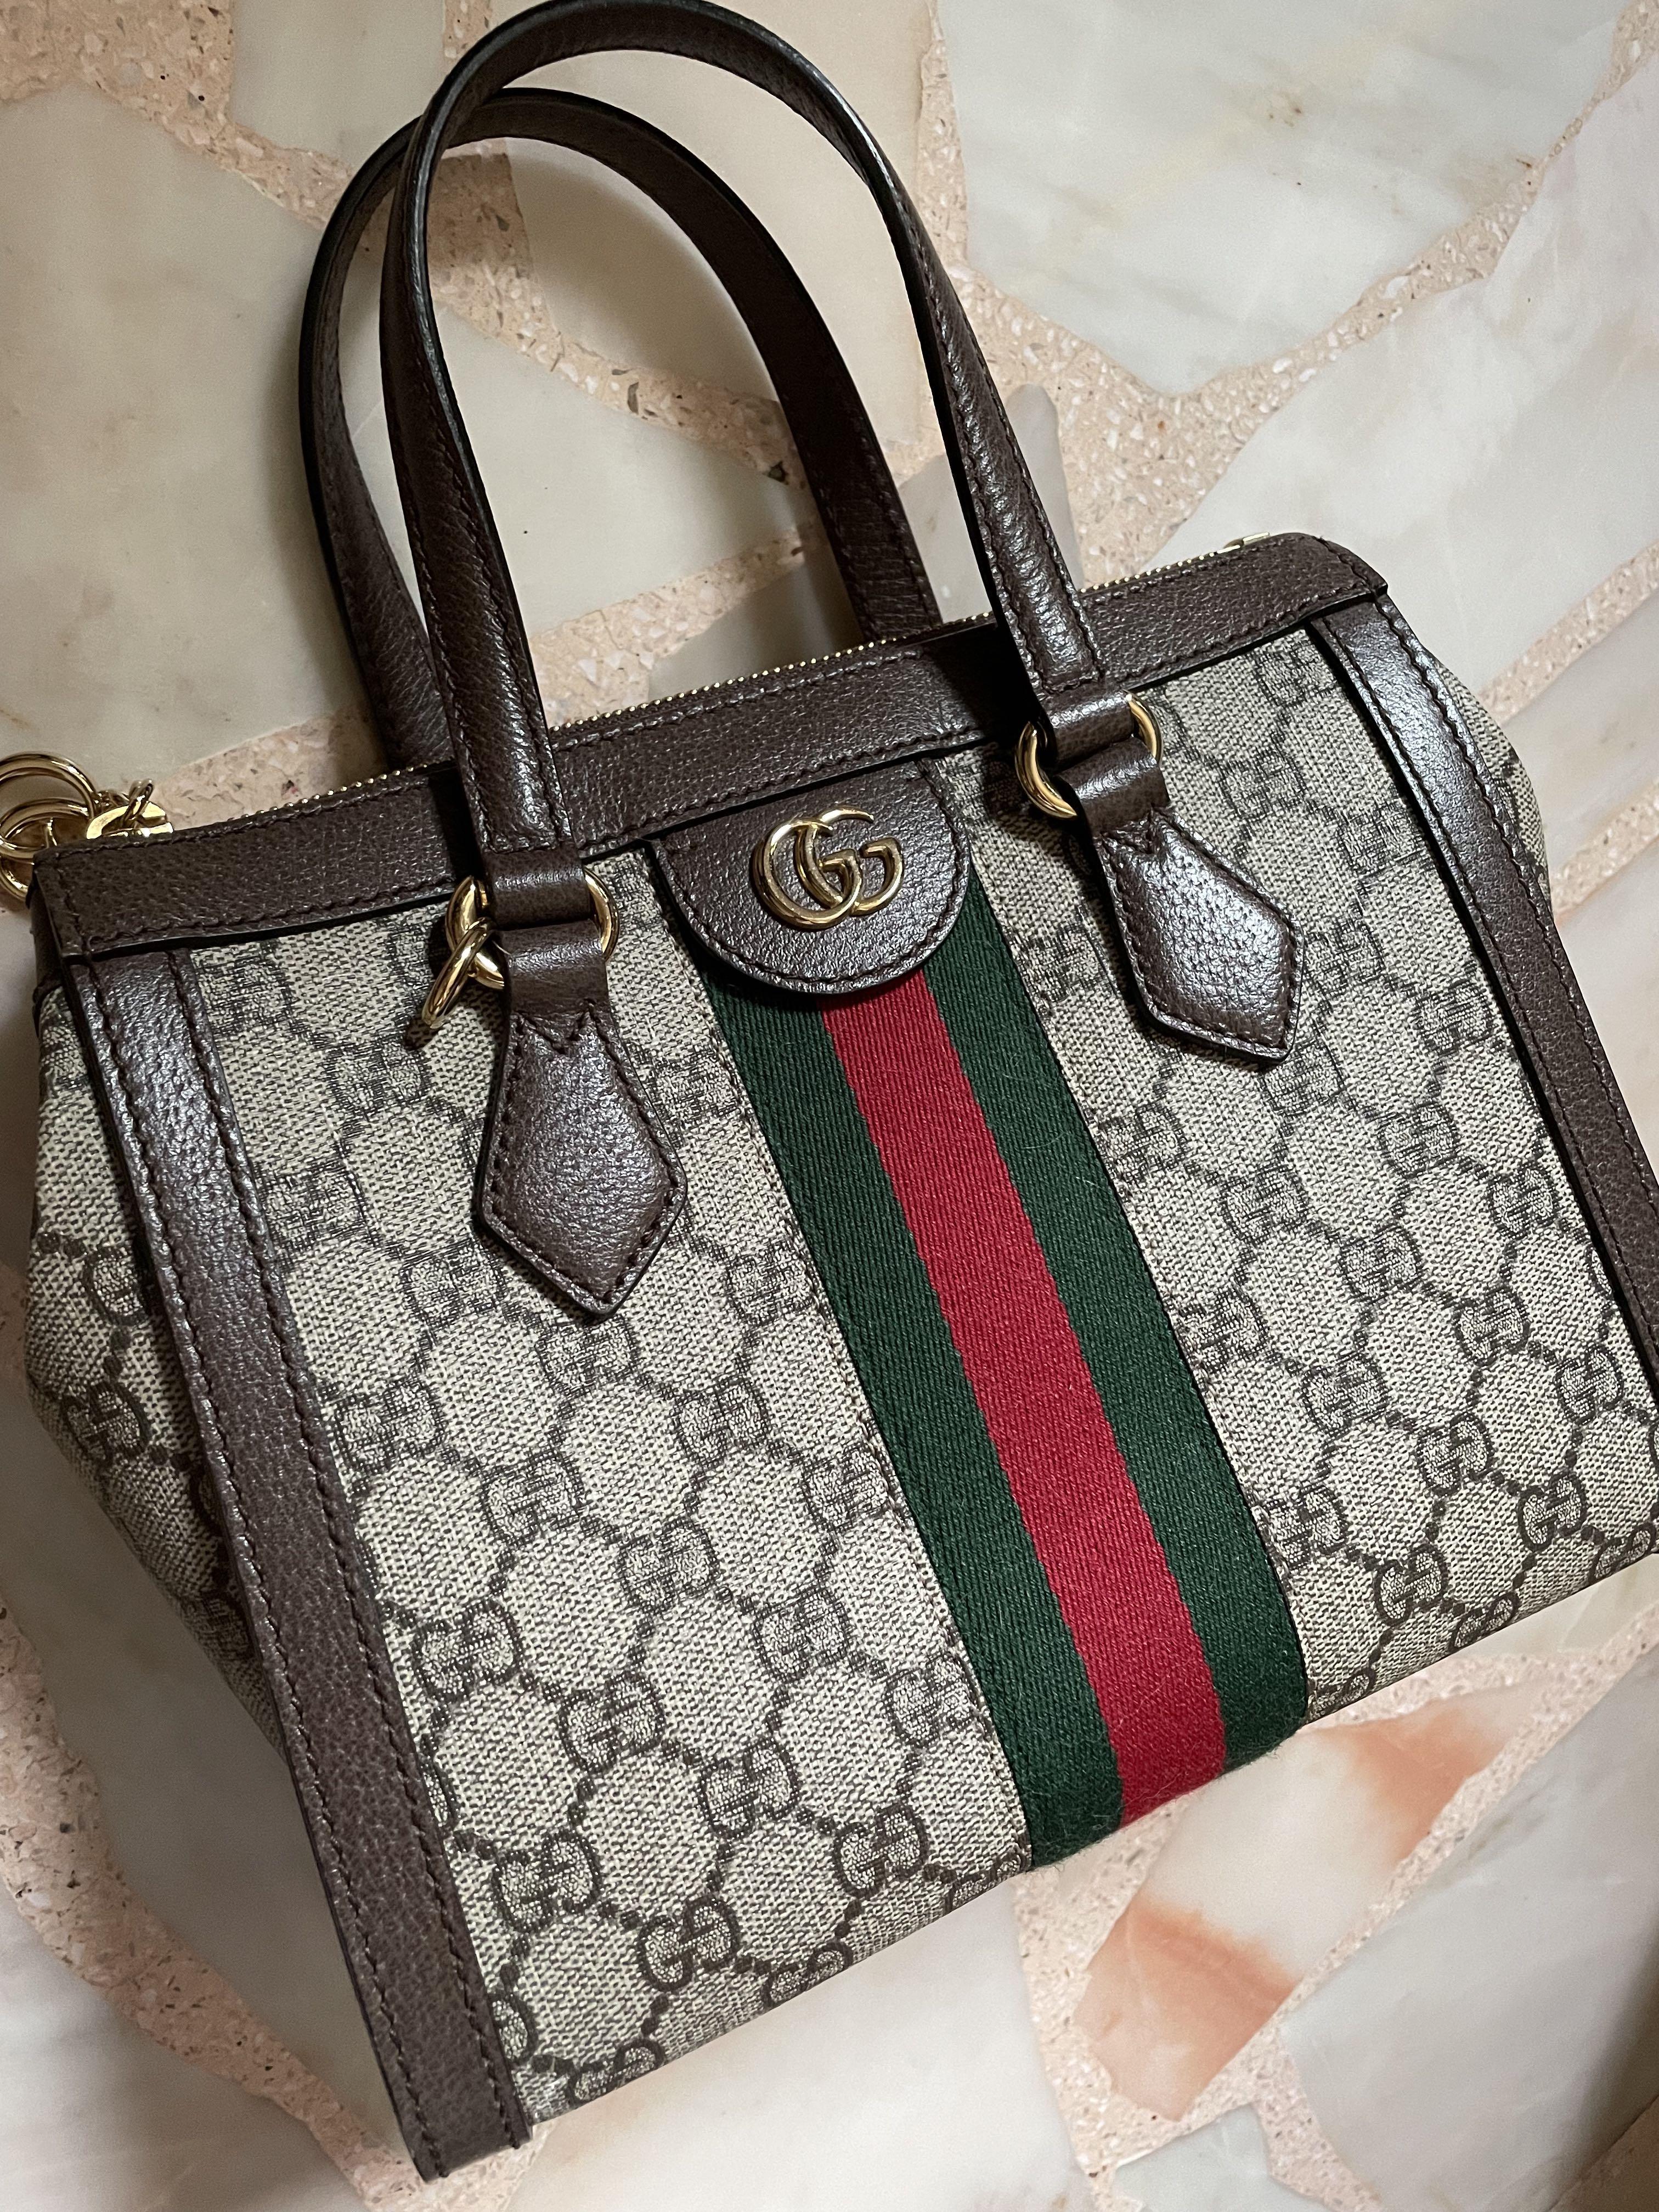 Gucci GG Supreme Ophidia Small Tote - Touched Vintage